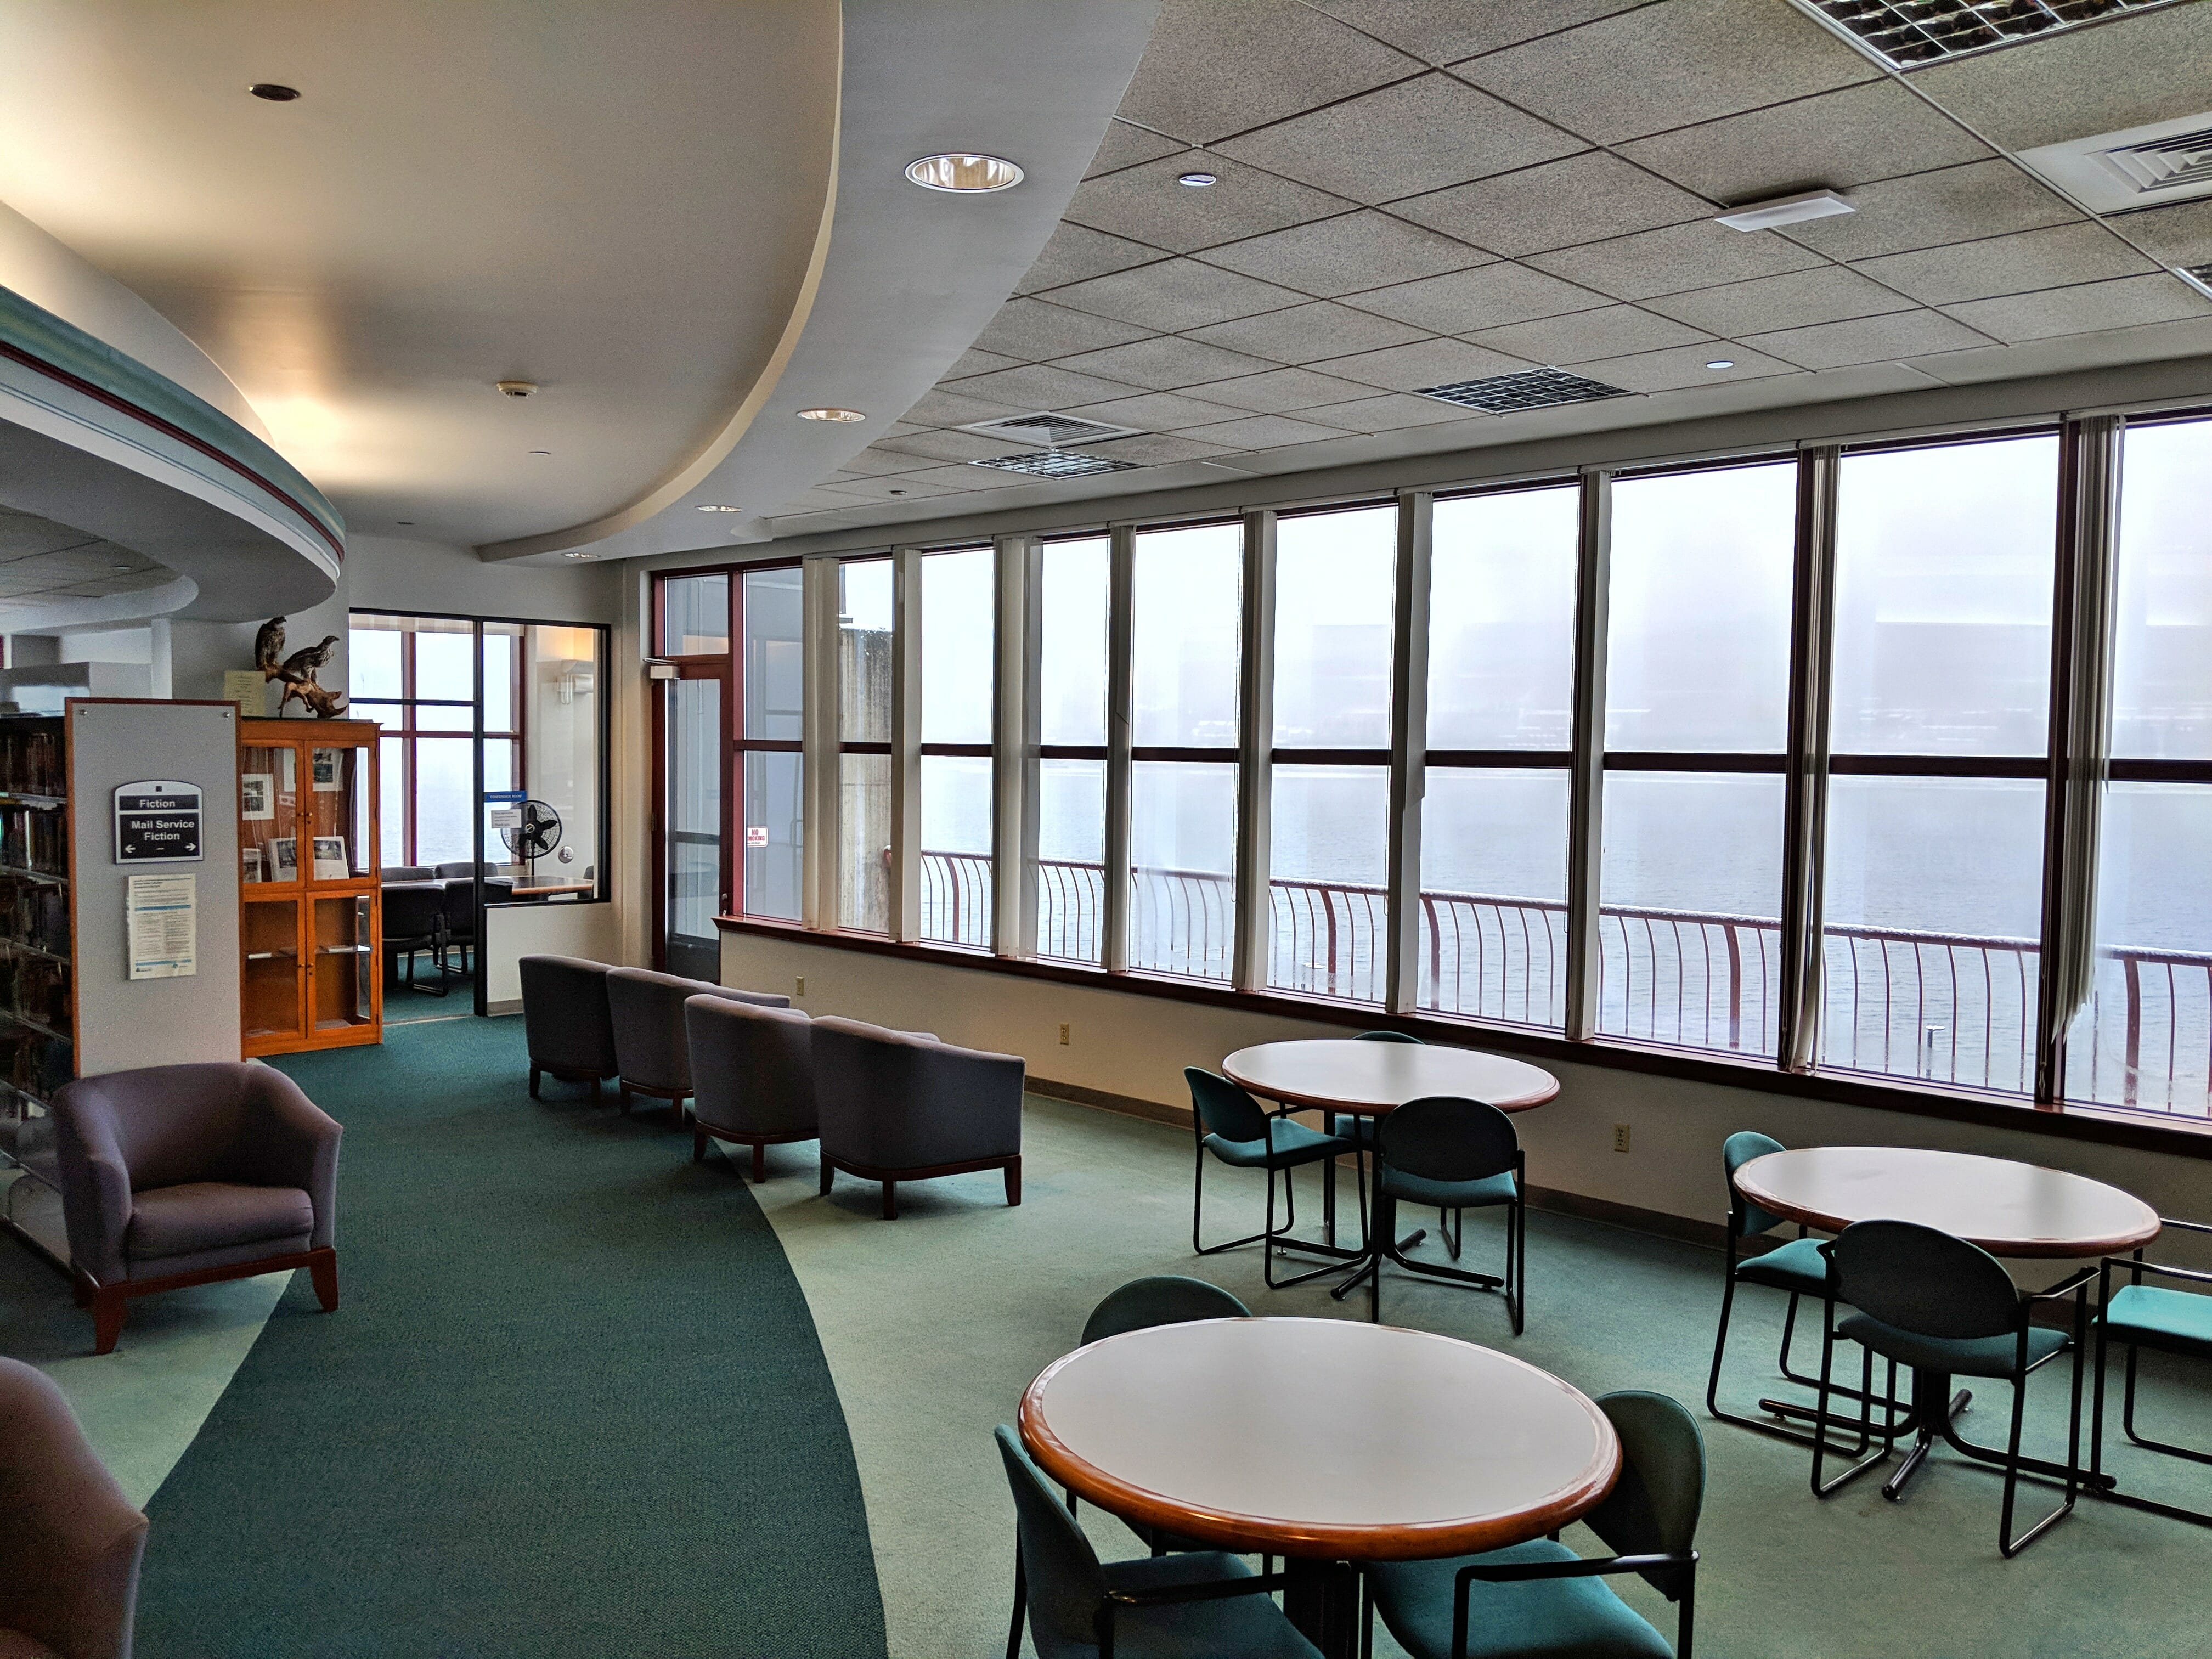 Seating area in the Downtown Library